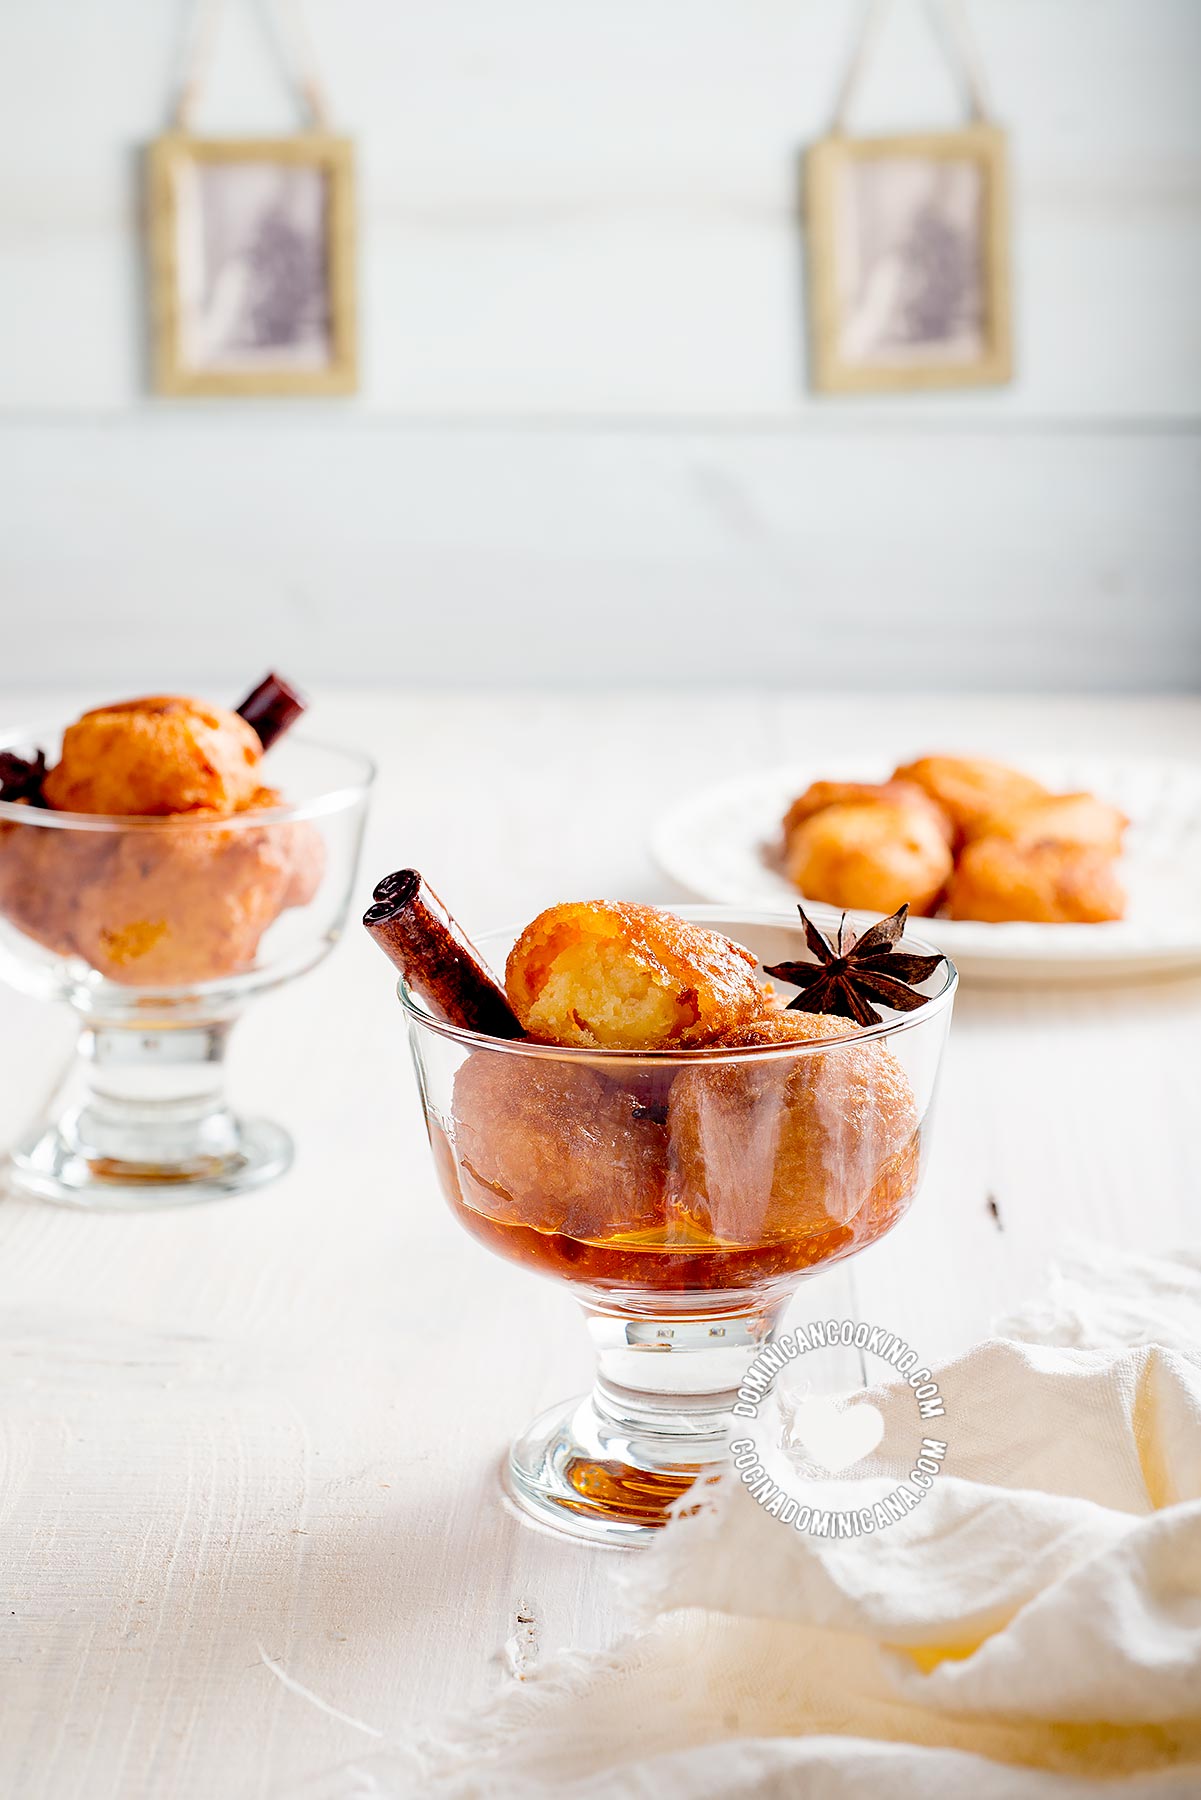 Buñuelos de Yuca (Cassava Sweet Puff Fritters with Spiced Syrup)